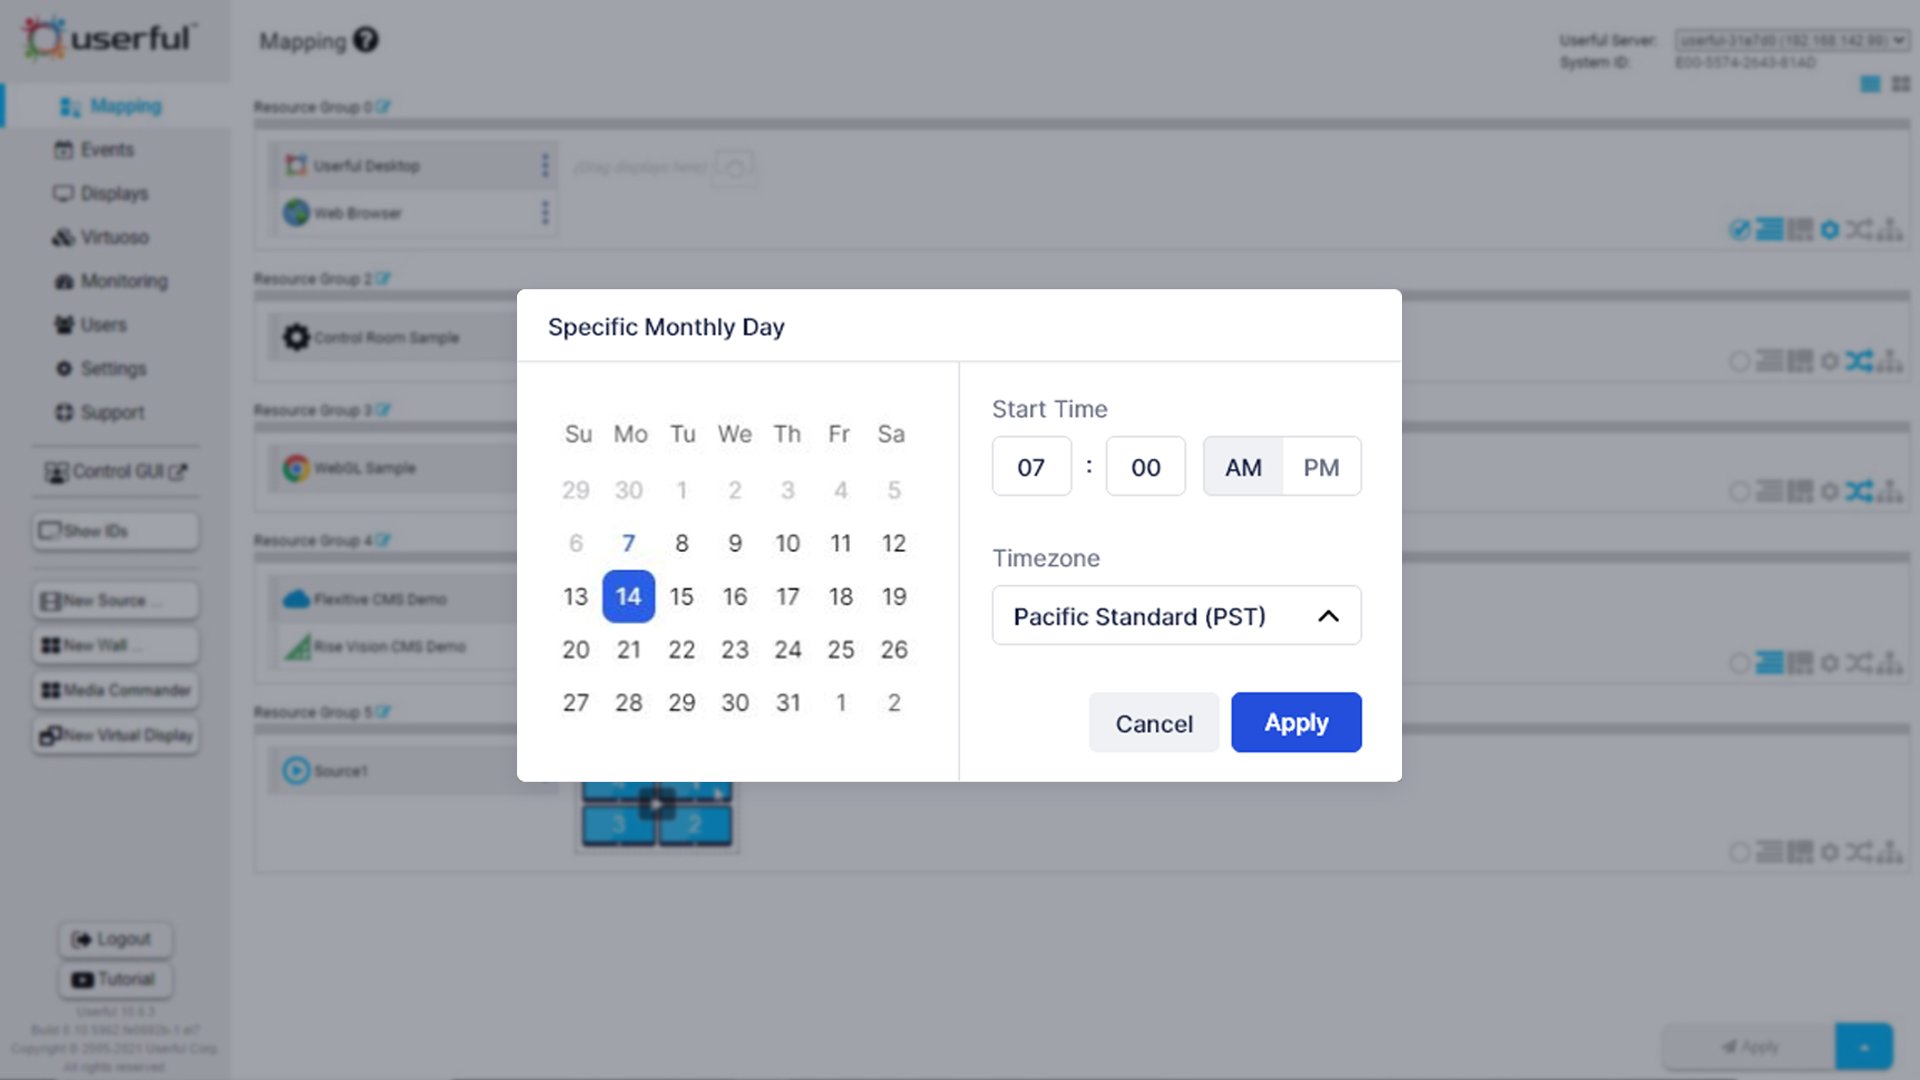 Example of calendar user interface to schedule meetings